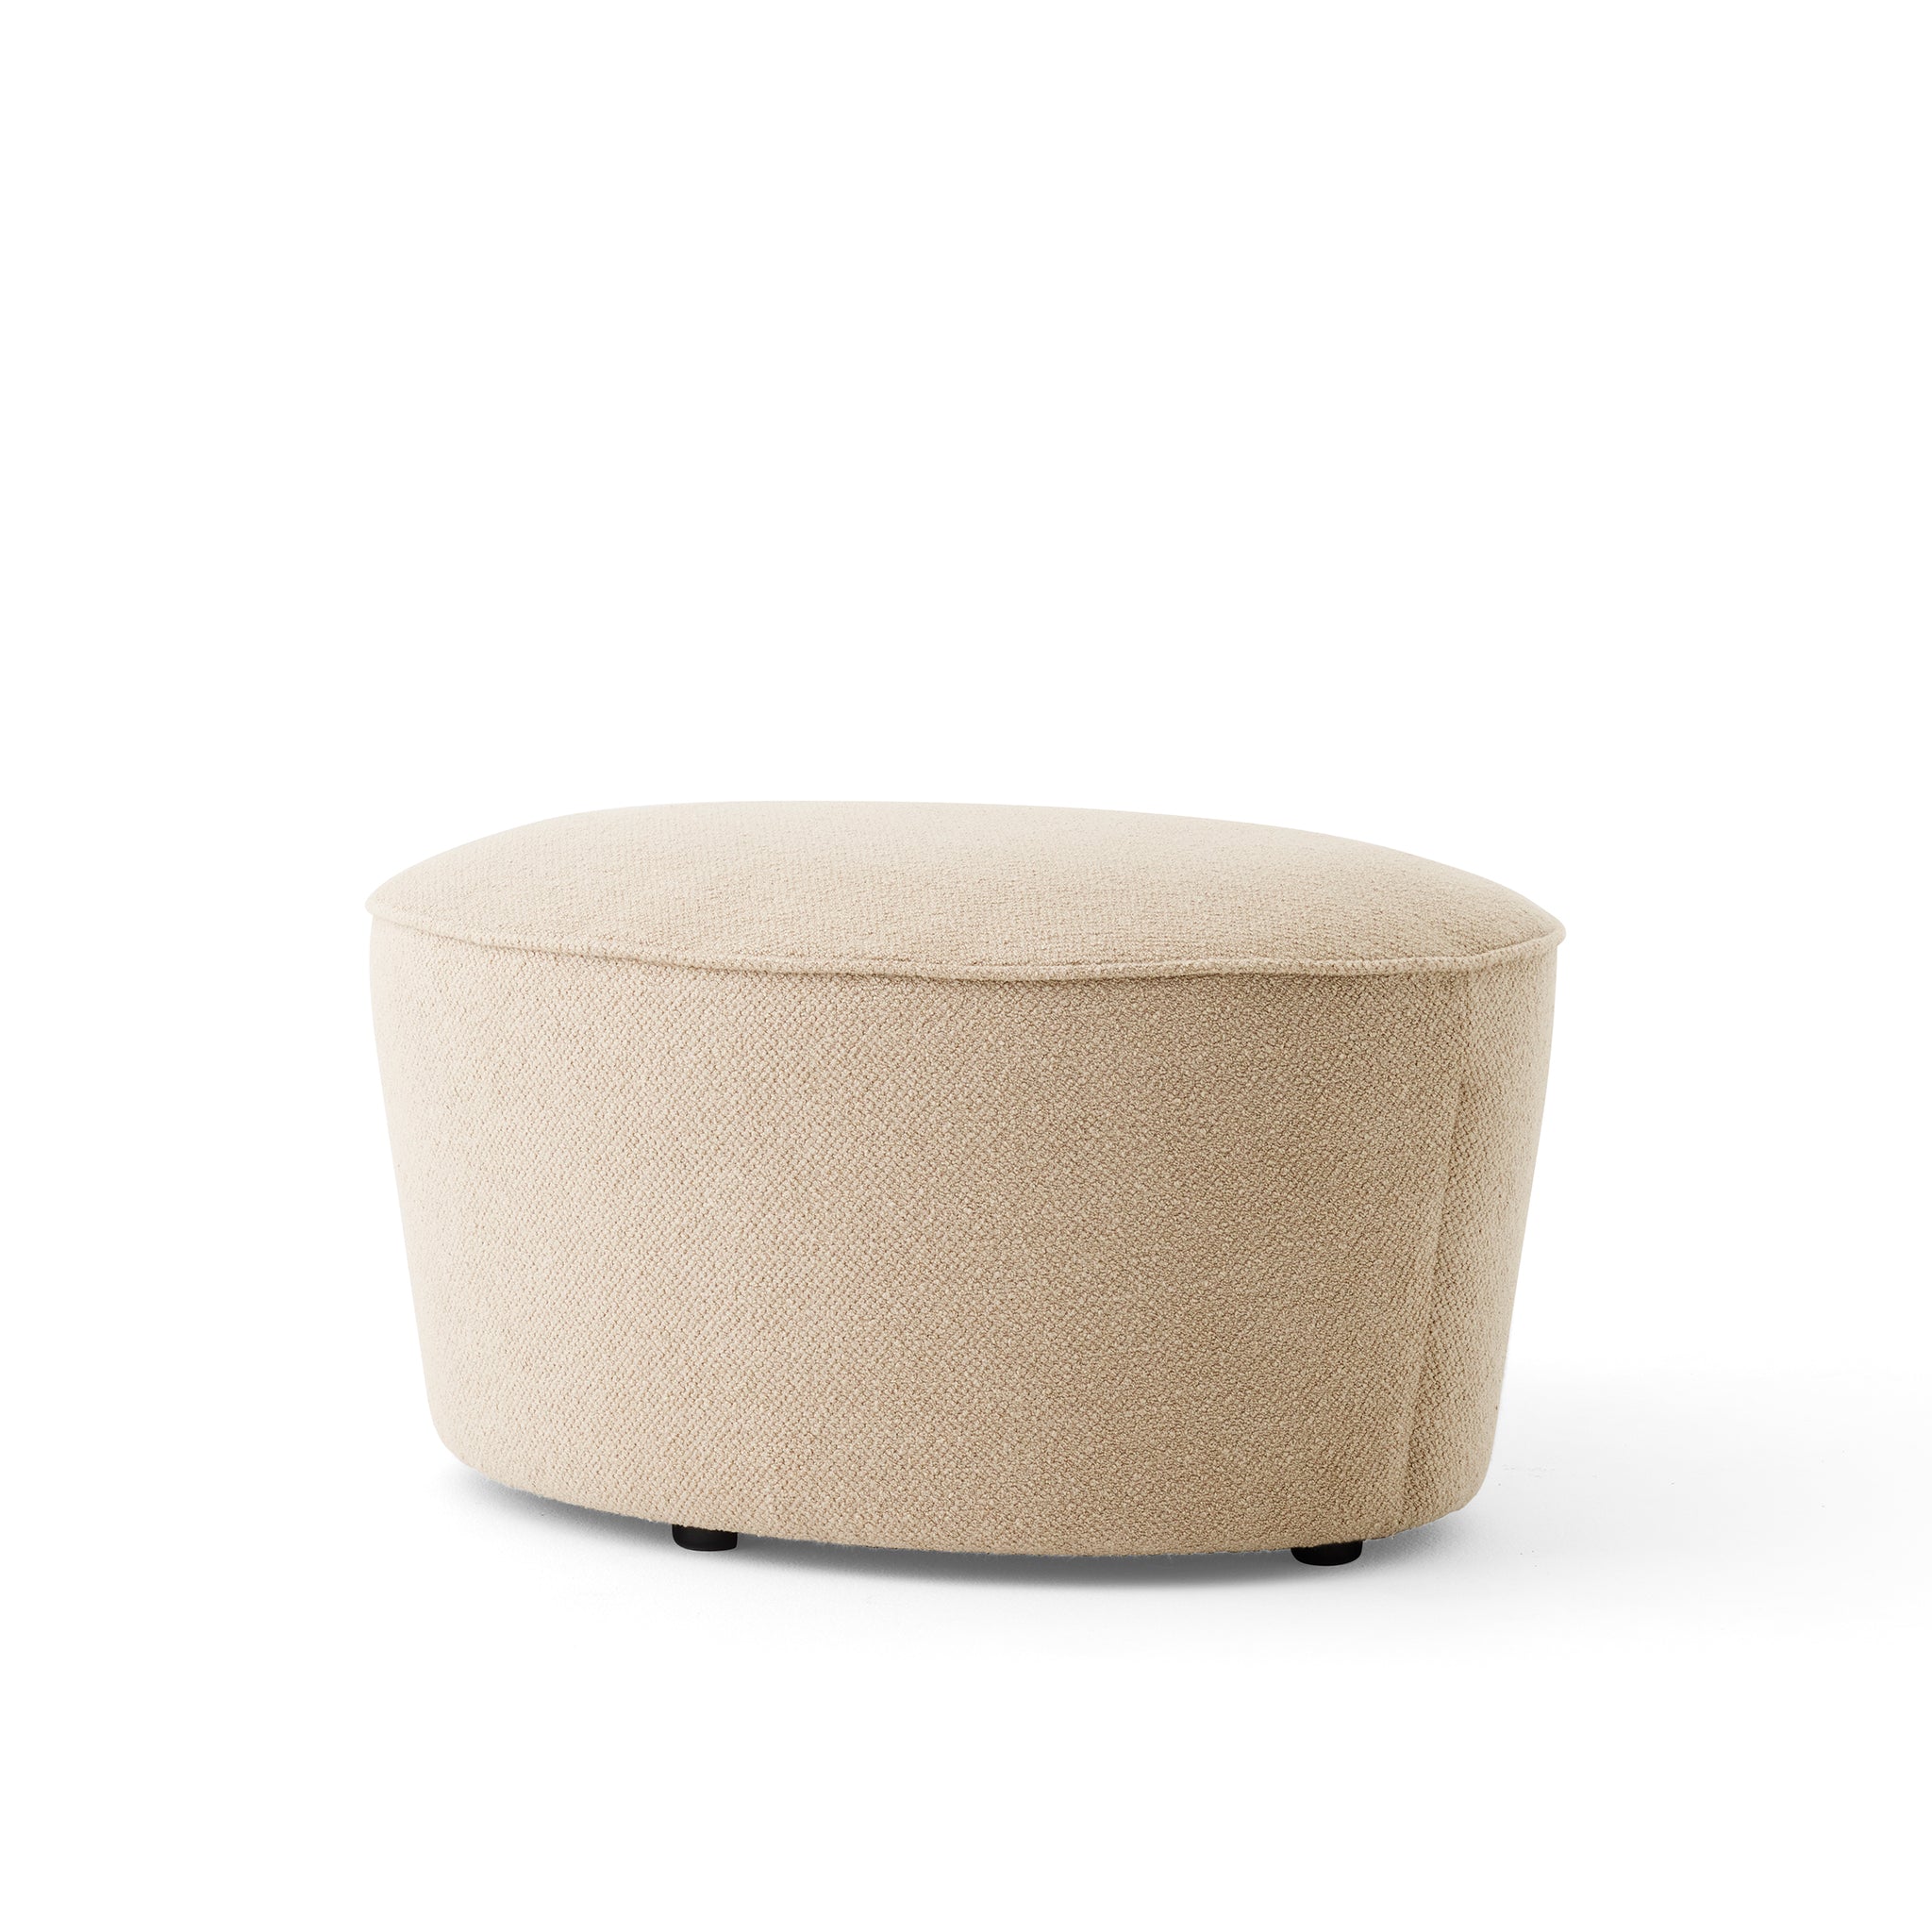 Cairn Pouf by Nick Ross